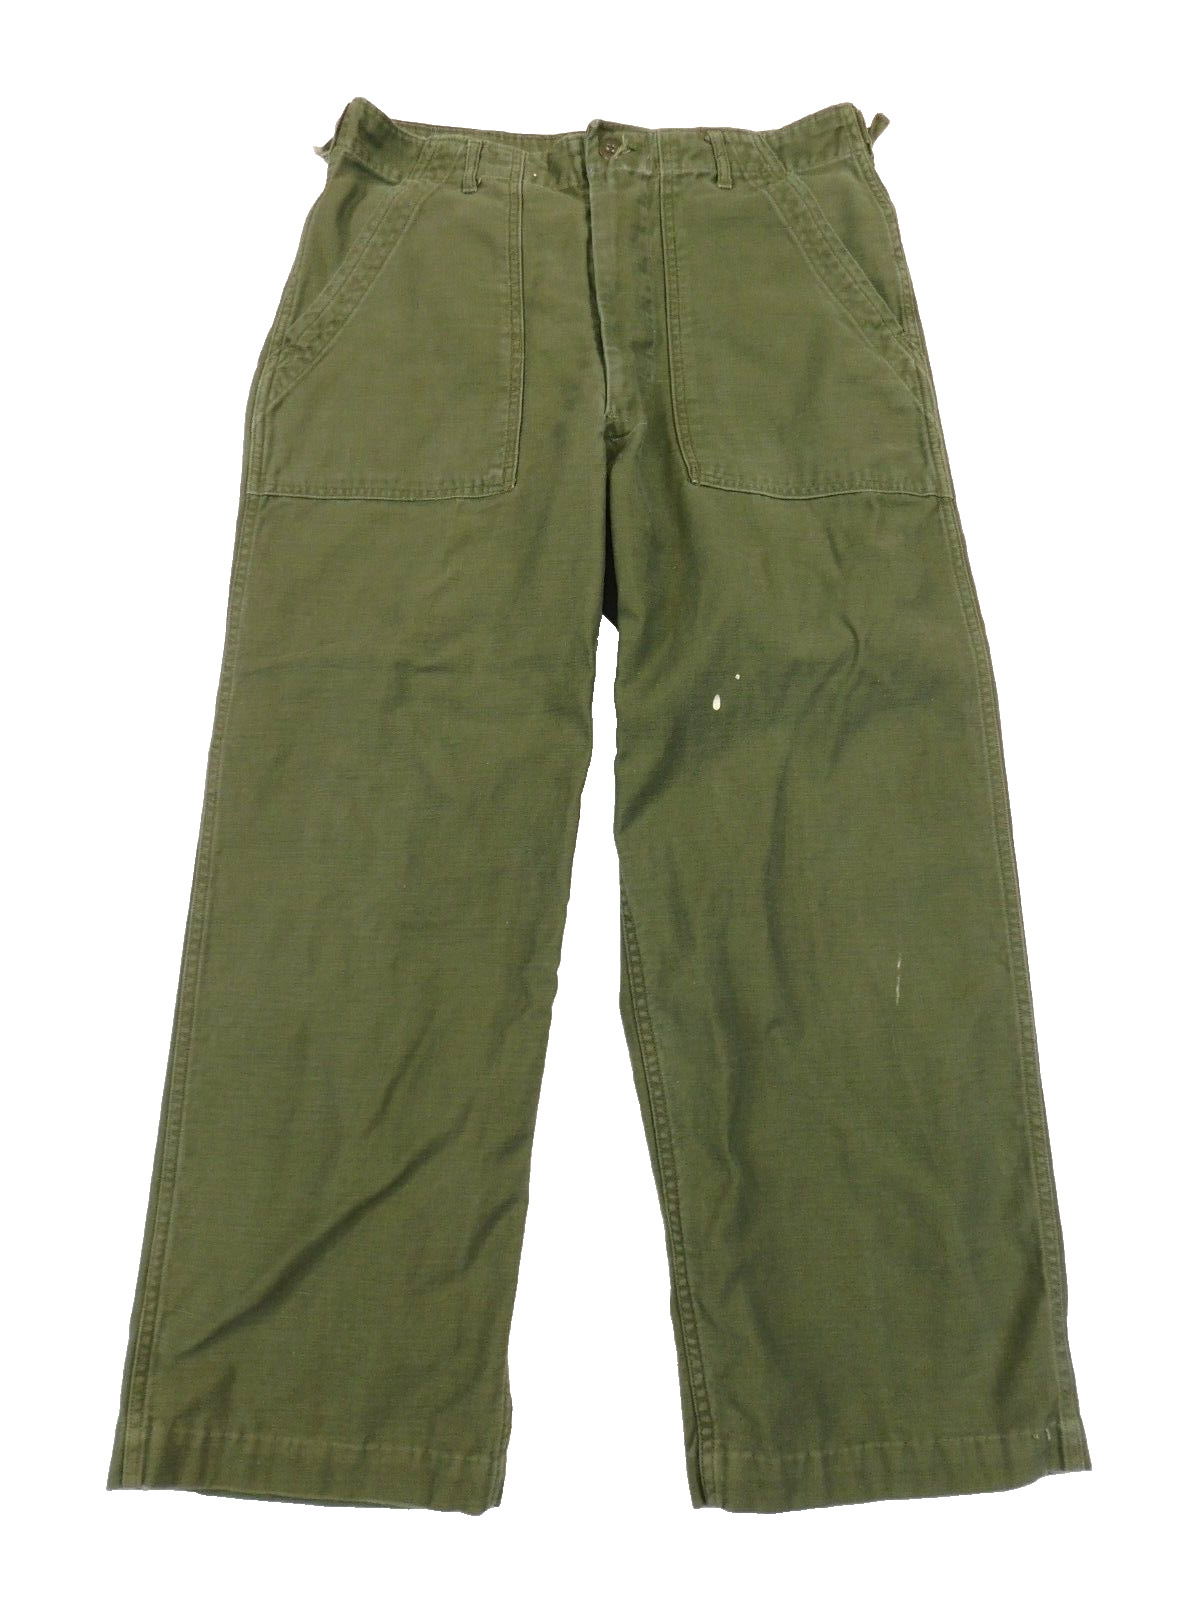 Vietnam US Army Fatigue Pants 34 x 26 OG-107 Sateen Cttn Green Military Trousers